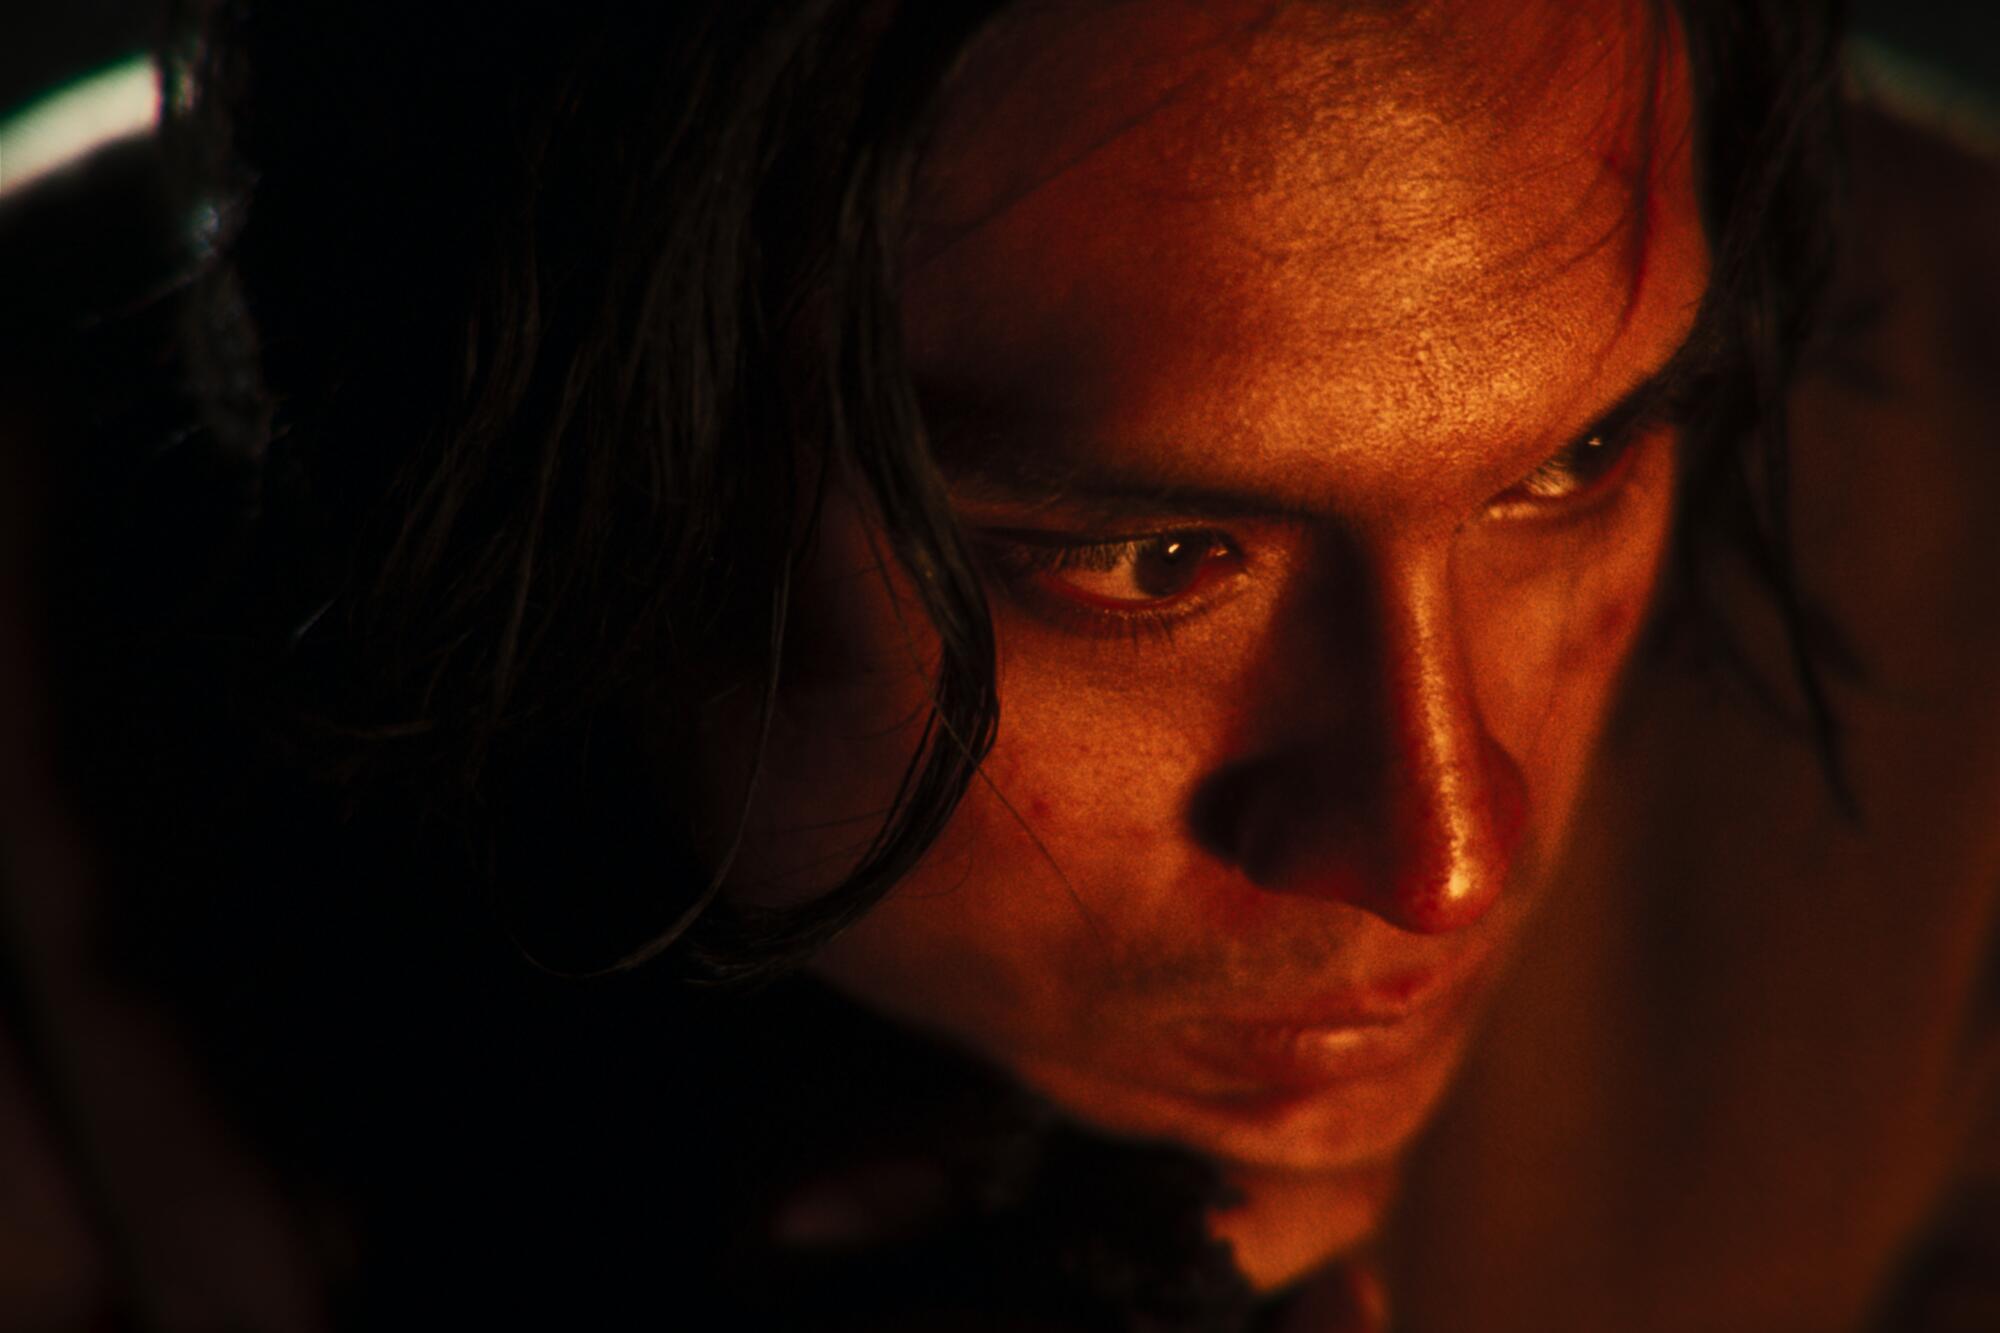 An indigenous person in closeup, lit as if by the glow of a fire